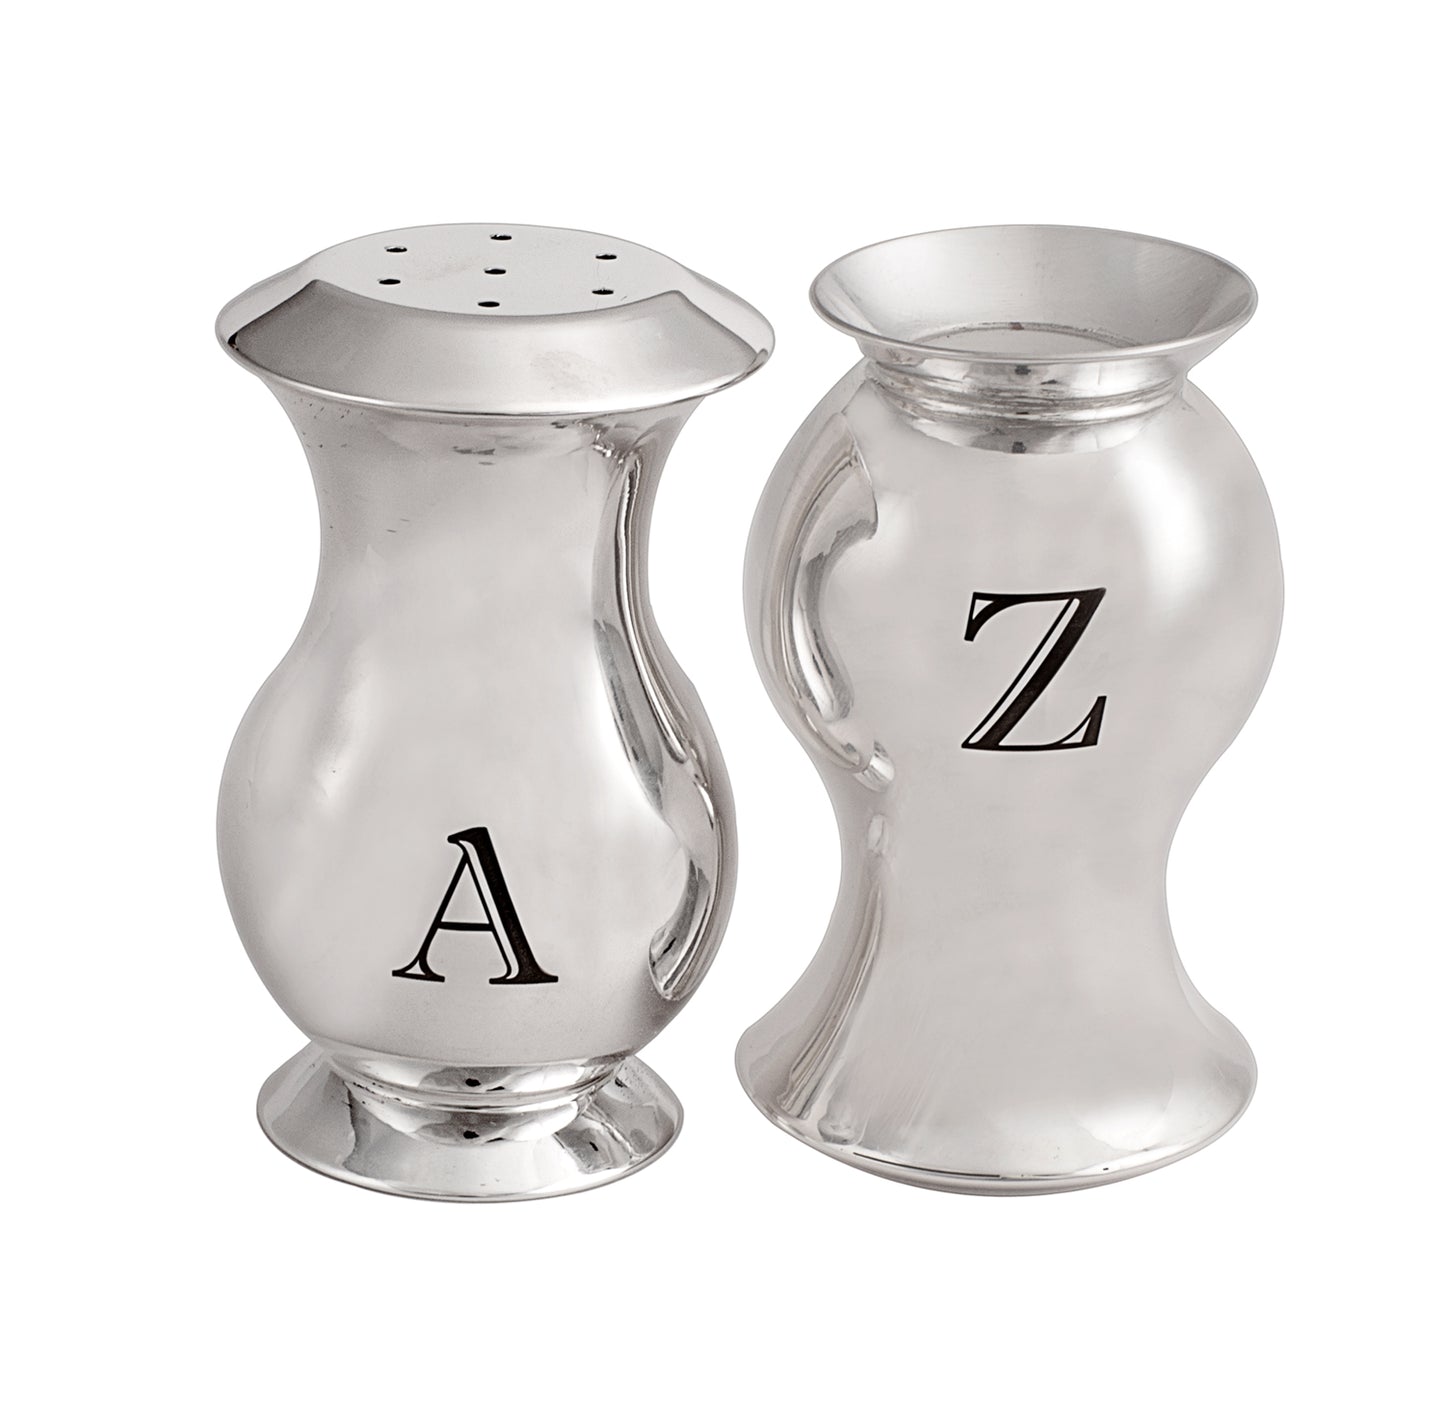 "MARIOTTI" SALT AND PEPPER SHAKERS - STERLING SILVER